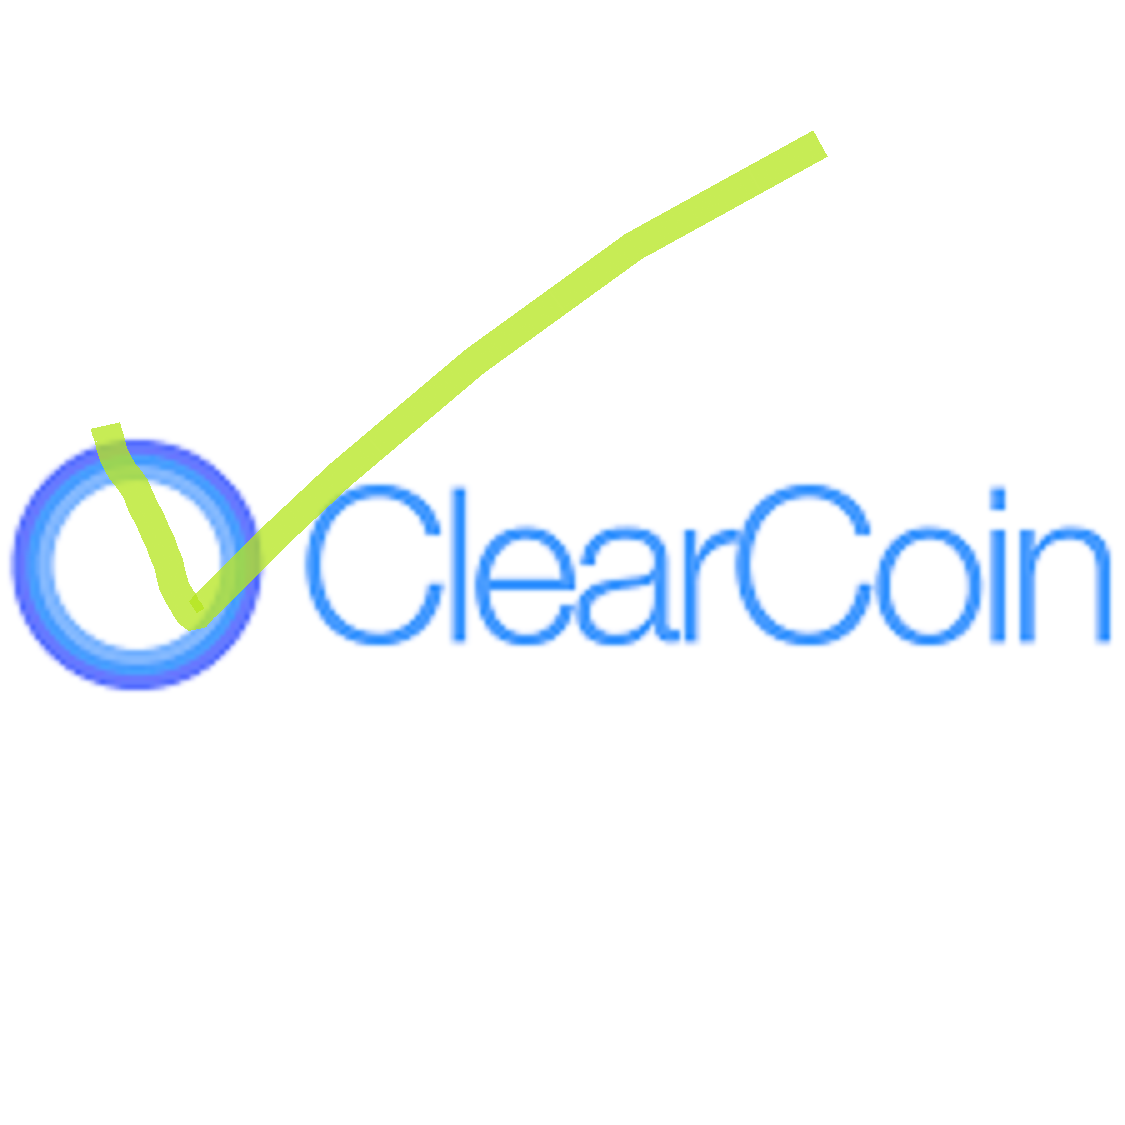 clearcoinimagecheckmark.png